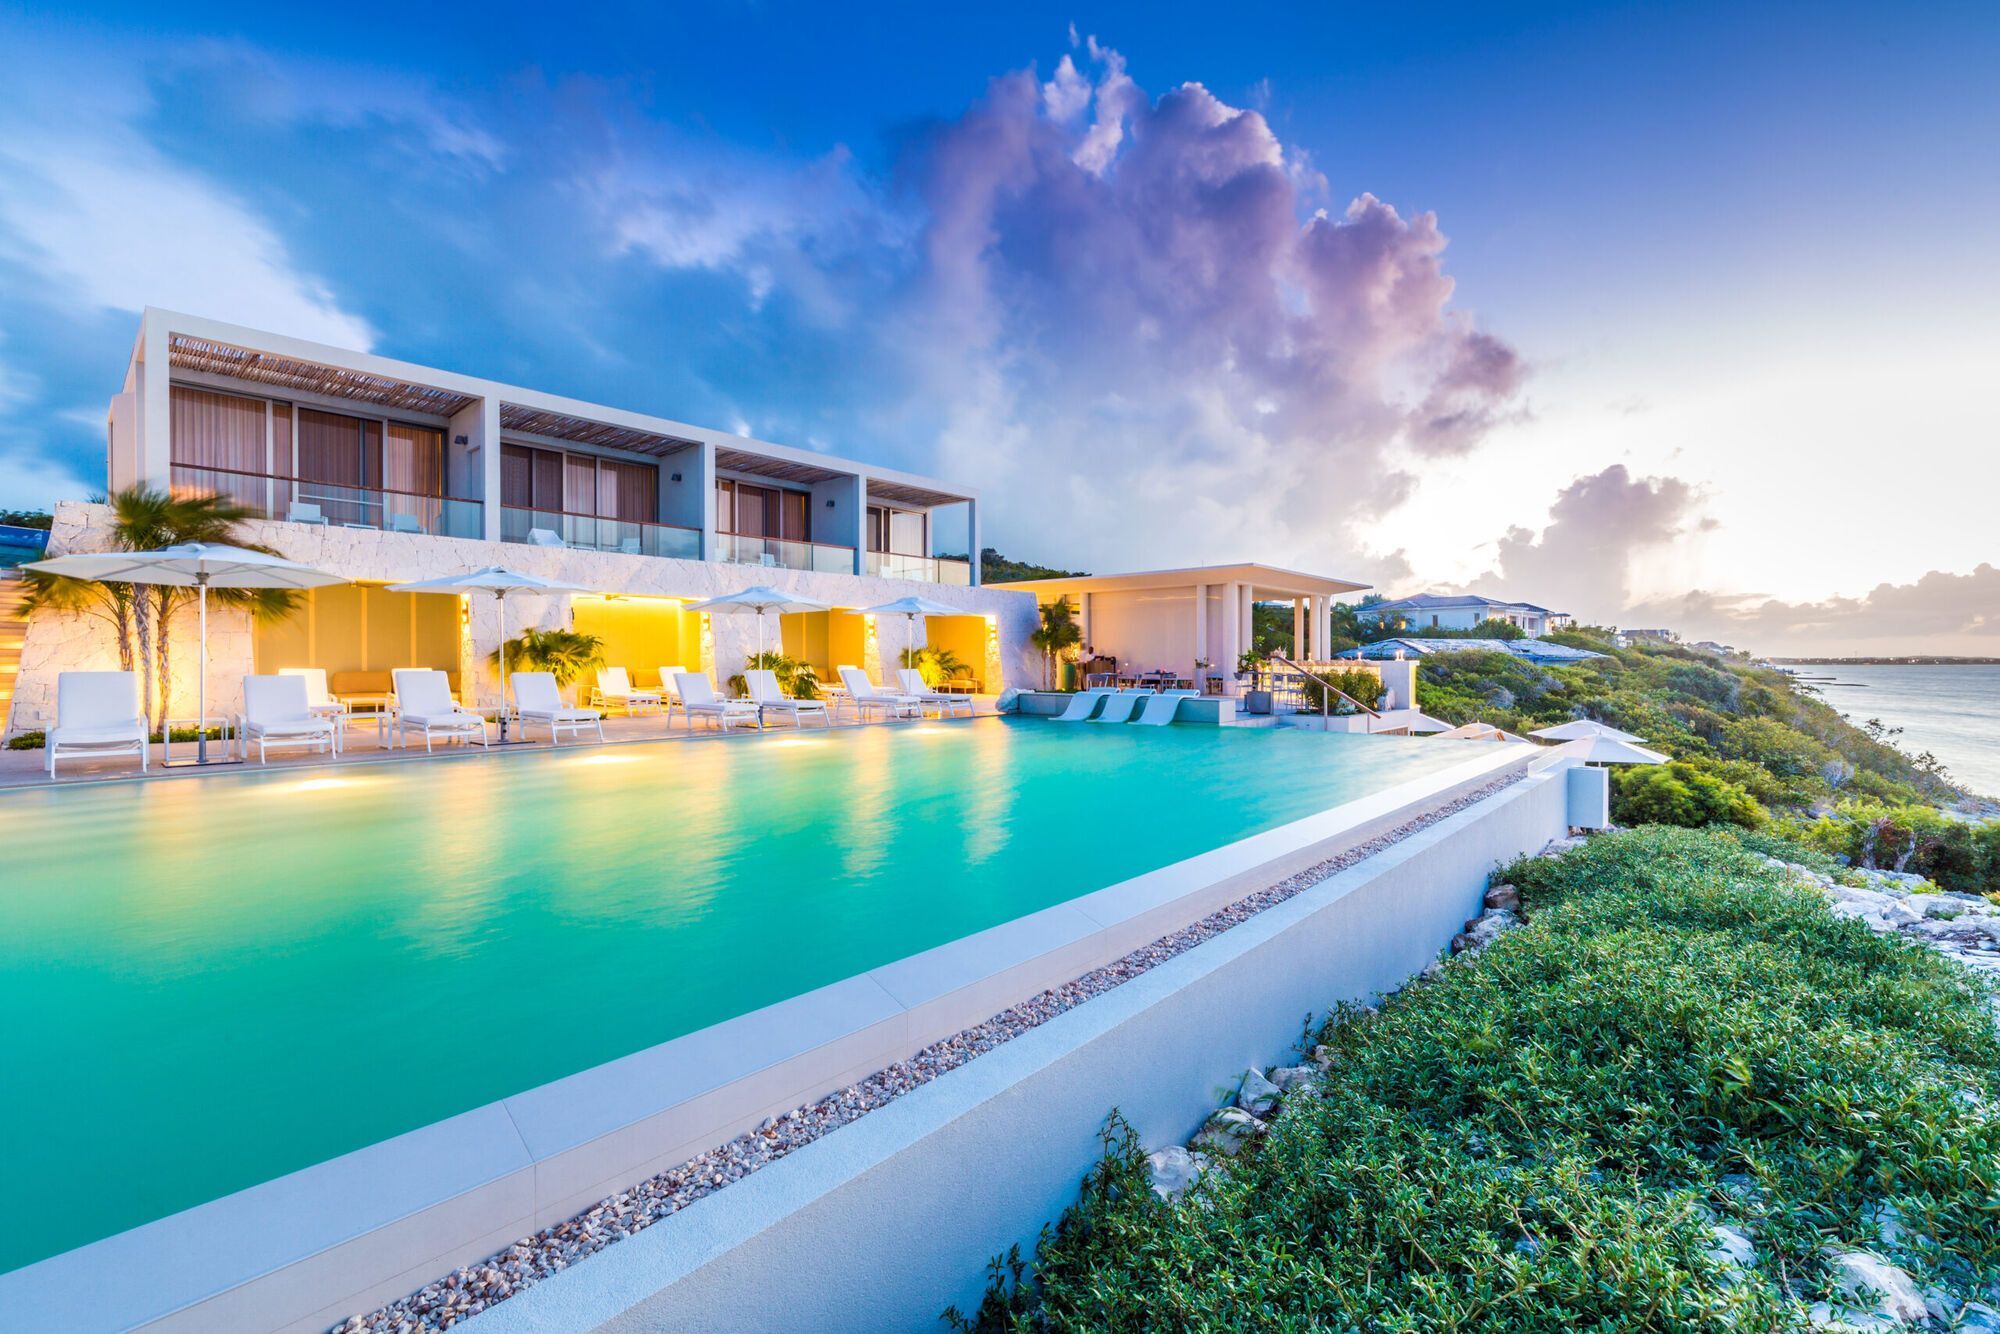 The best hotels in the Caribbean for an insider and authentic vacation filled with adventure and relaxation